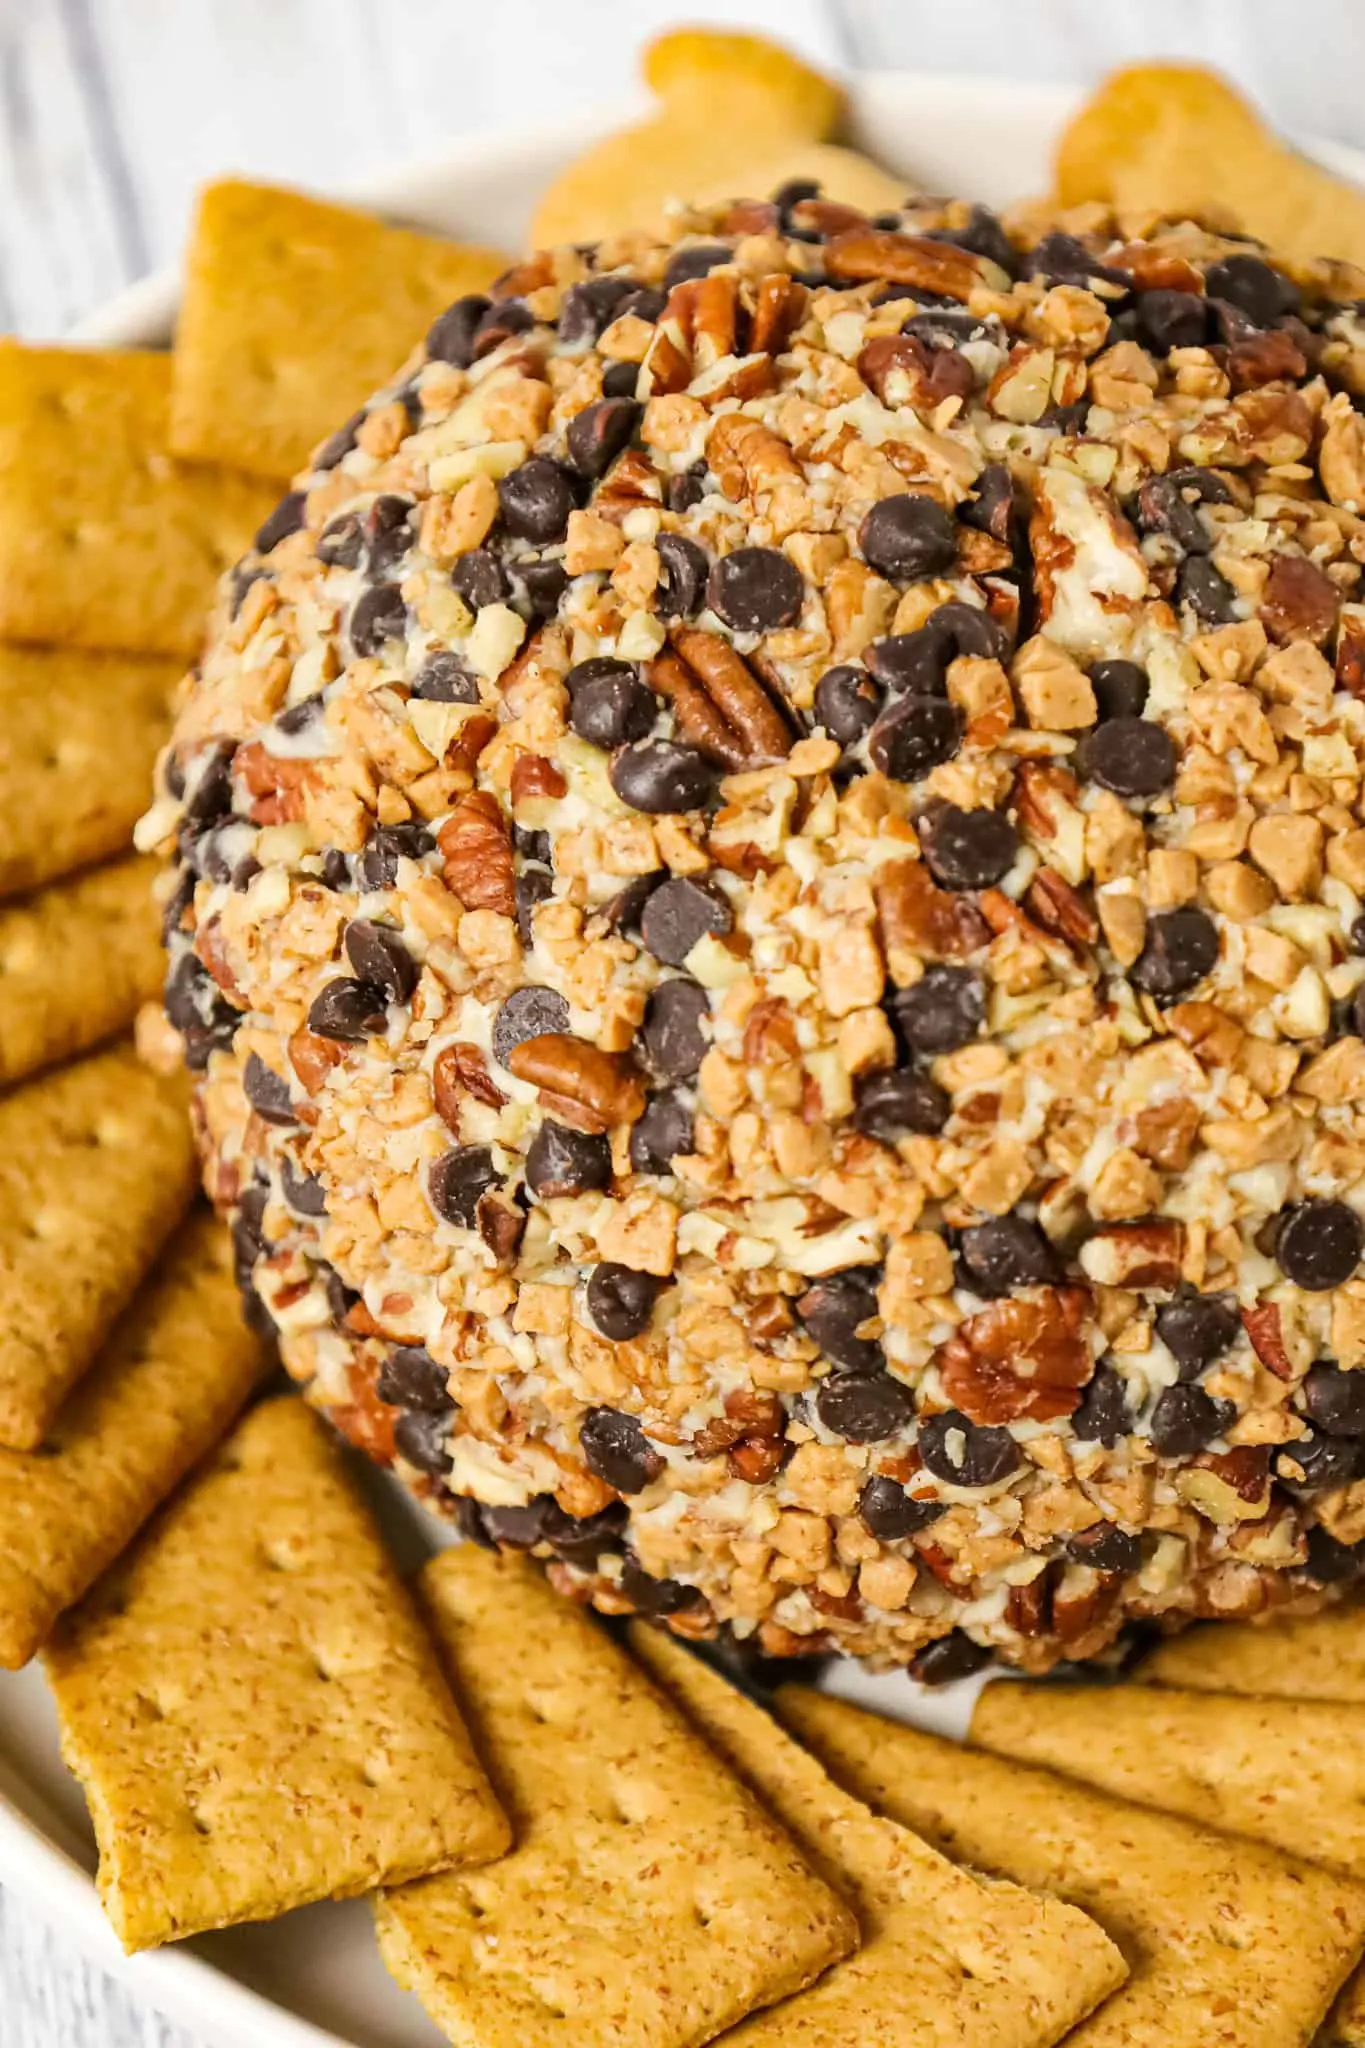 Chocolate Chip Cheese Ball is a tasty dessert dip recipe perfect for parties loaded with cream cheese, mini chocolate chips, toffee bits and chopped pecans.